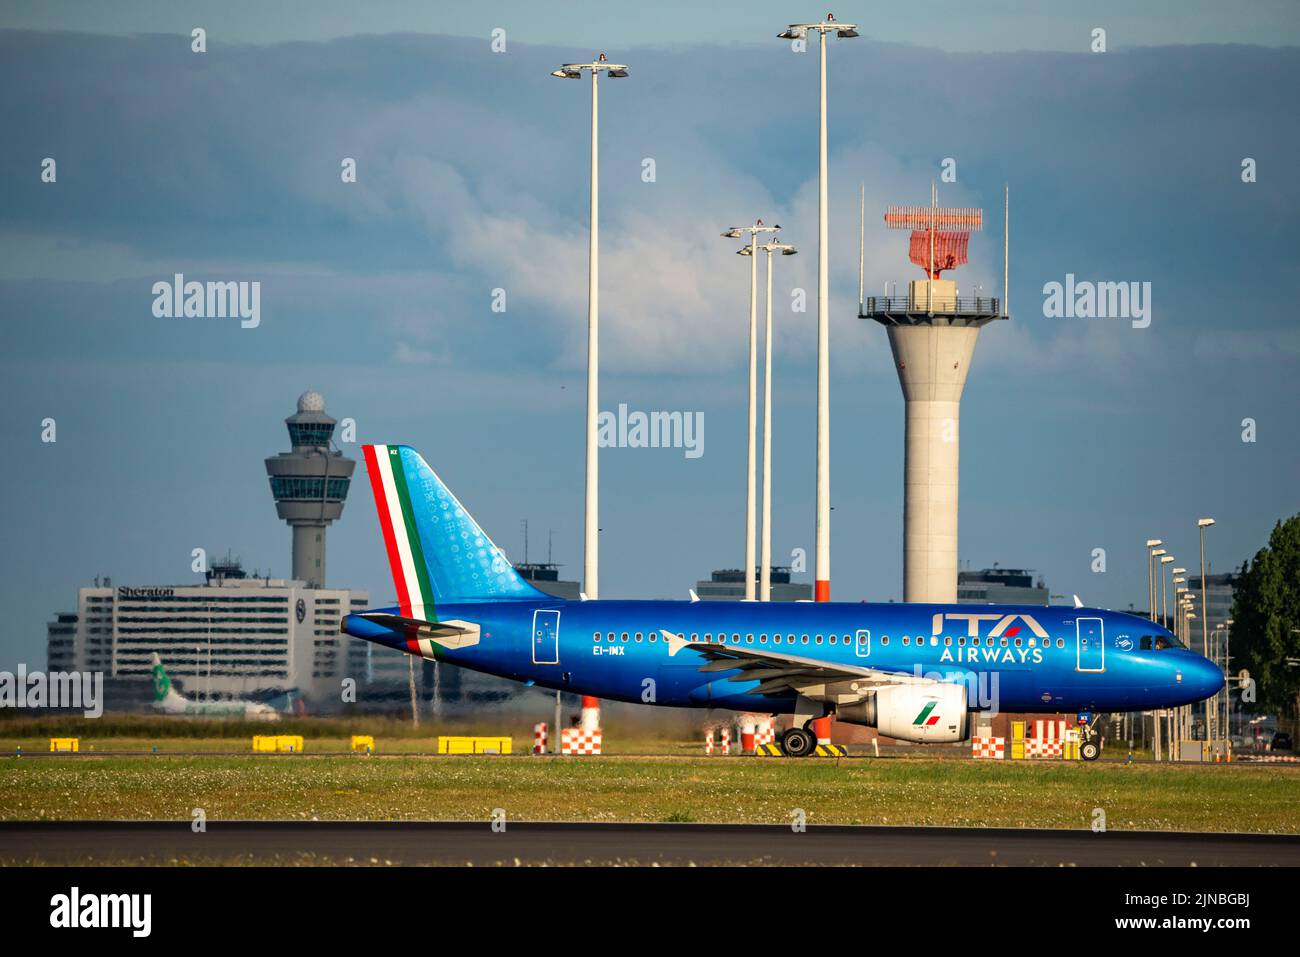 Amsterdam Shiphol Airport, Polderbaan, one of 6 runways, tower air traffic control, on taxiway to take-off, EI-IMX, ITA Airways Airbus A319-100. Stock Photo